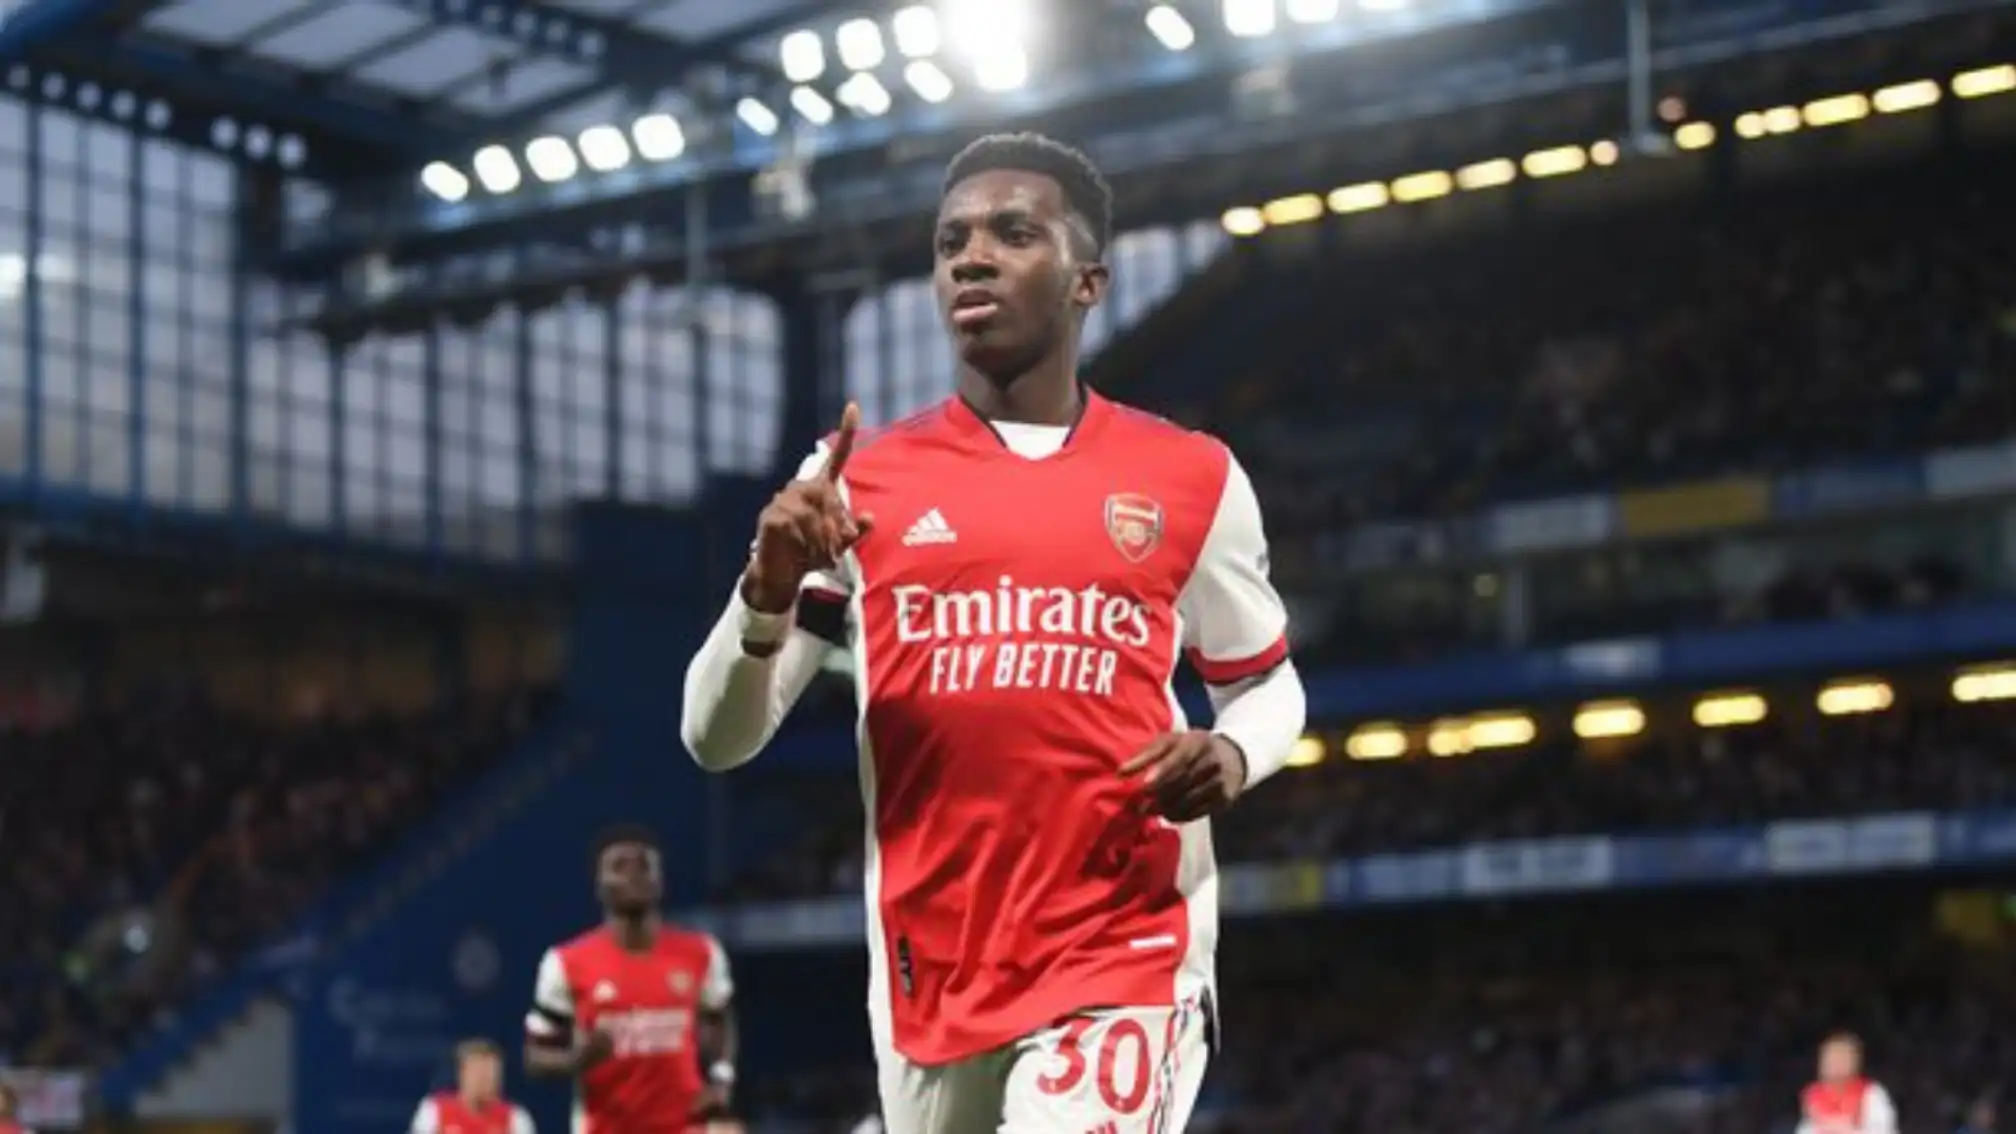 Two-goal Eddie Nketiah admits to being fuelled by Chelsea rejection at U-14 level in Arsenal victory